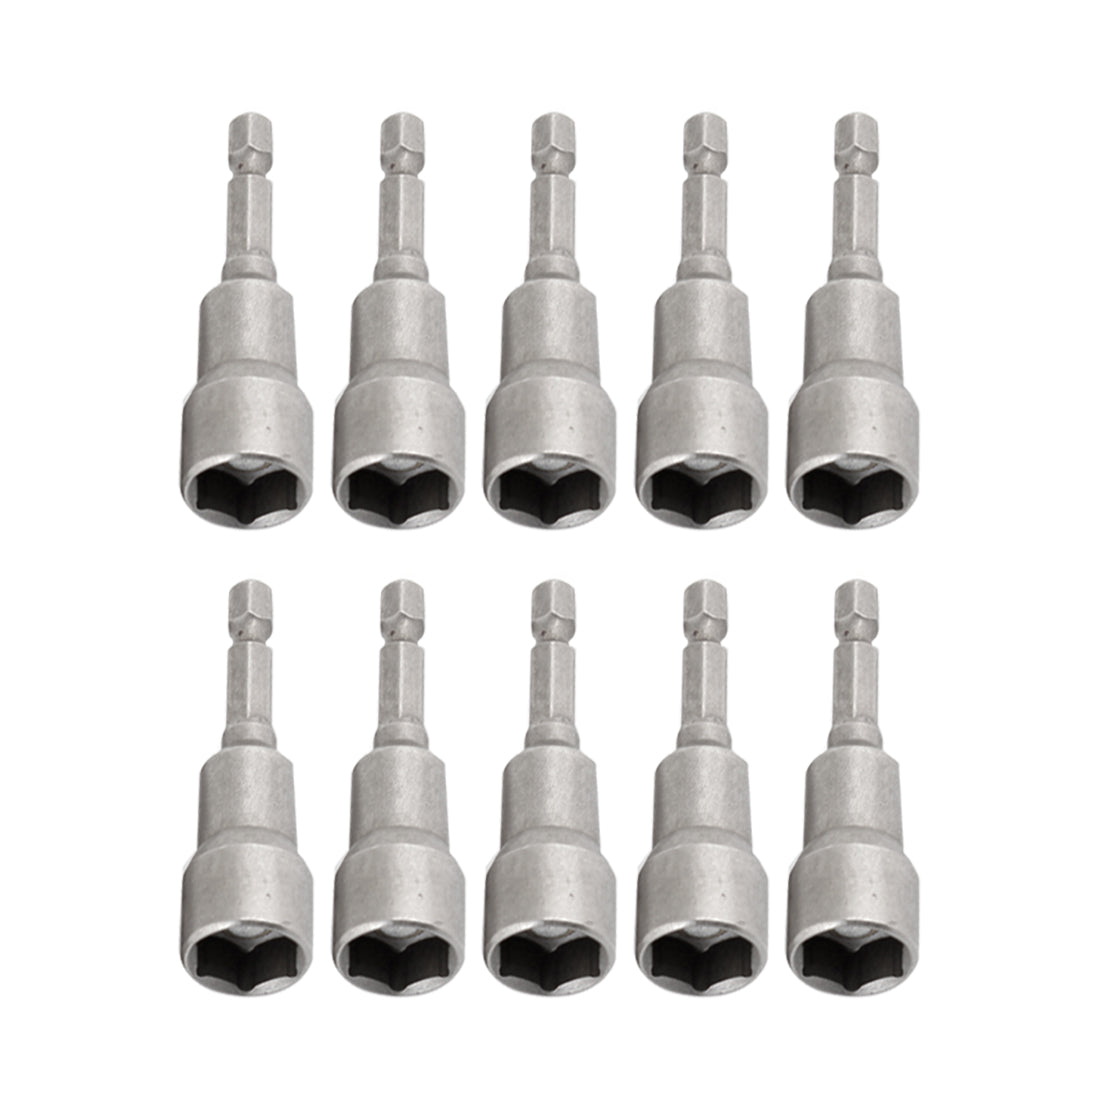 uxcell Uxcell 13mm Socket 1/4" Hex Shank 65mm Length Magnetic Nut Drivers Drill Bits 10pcs